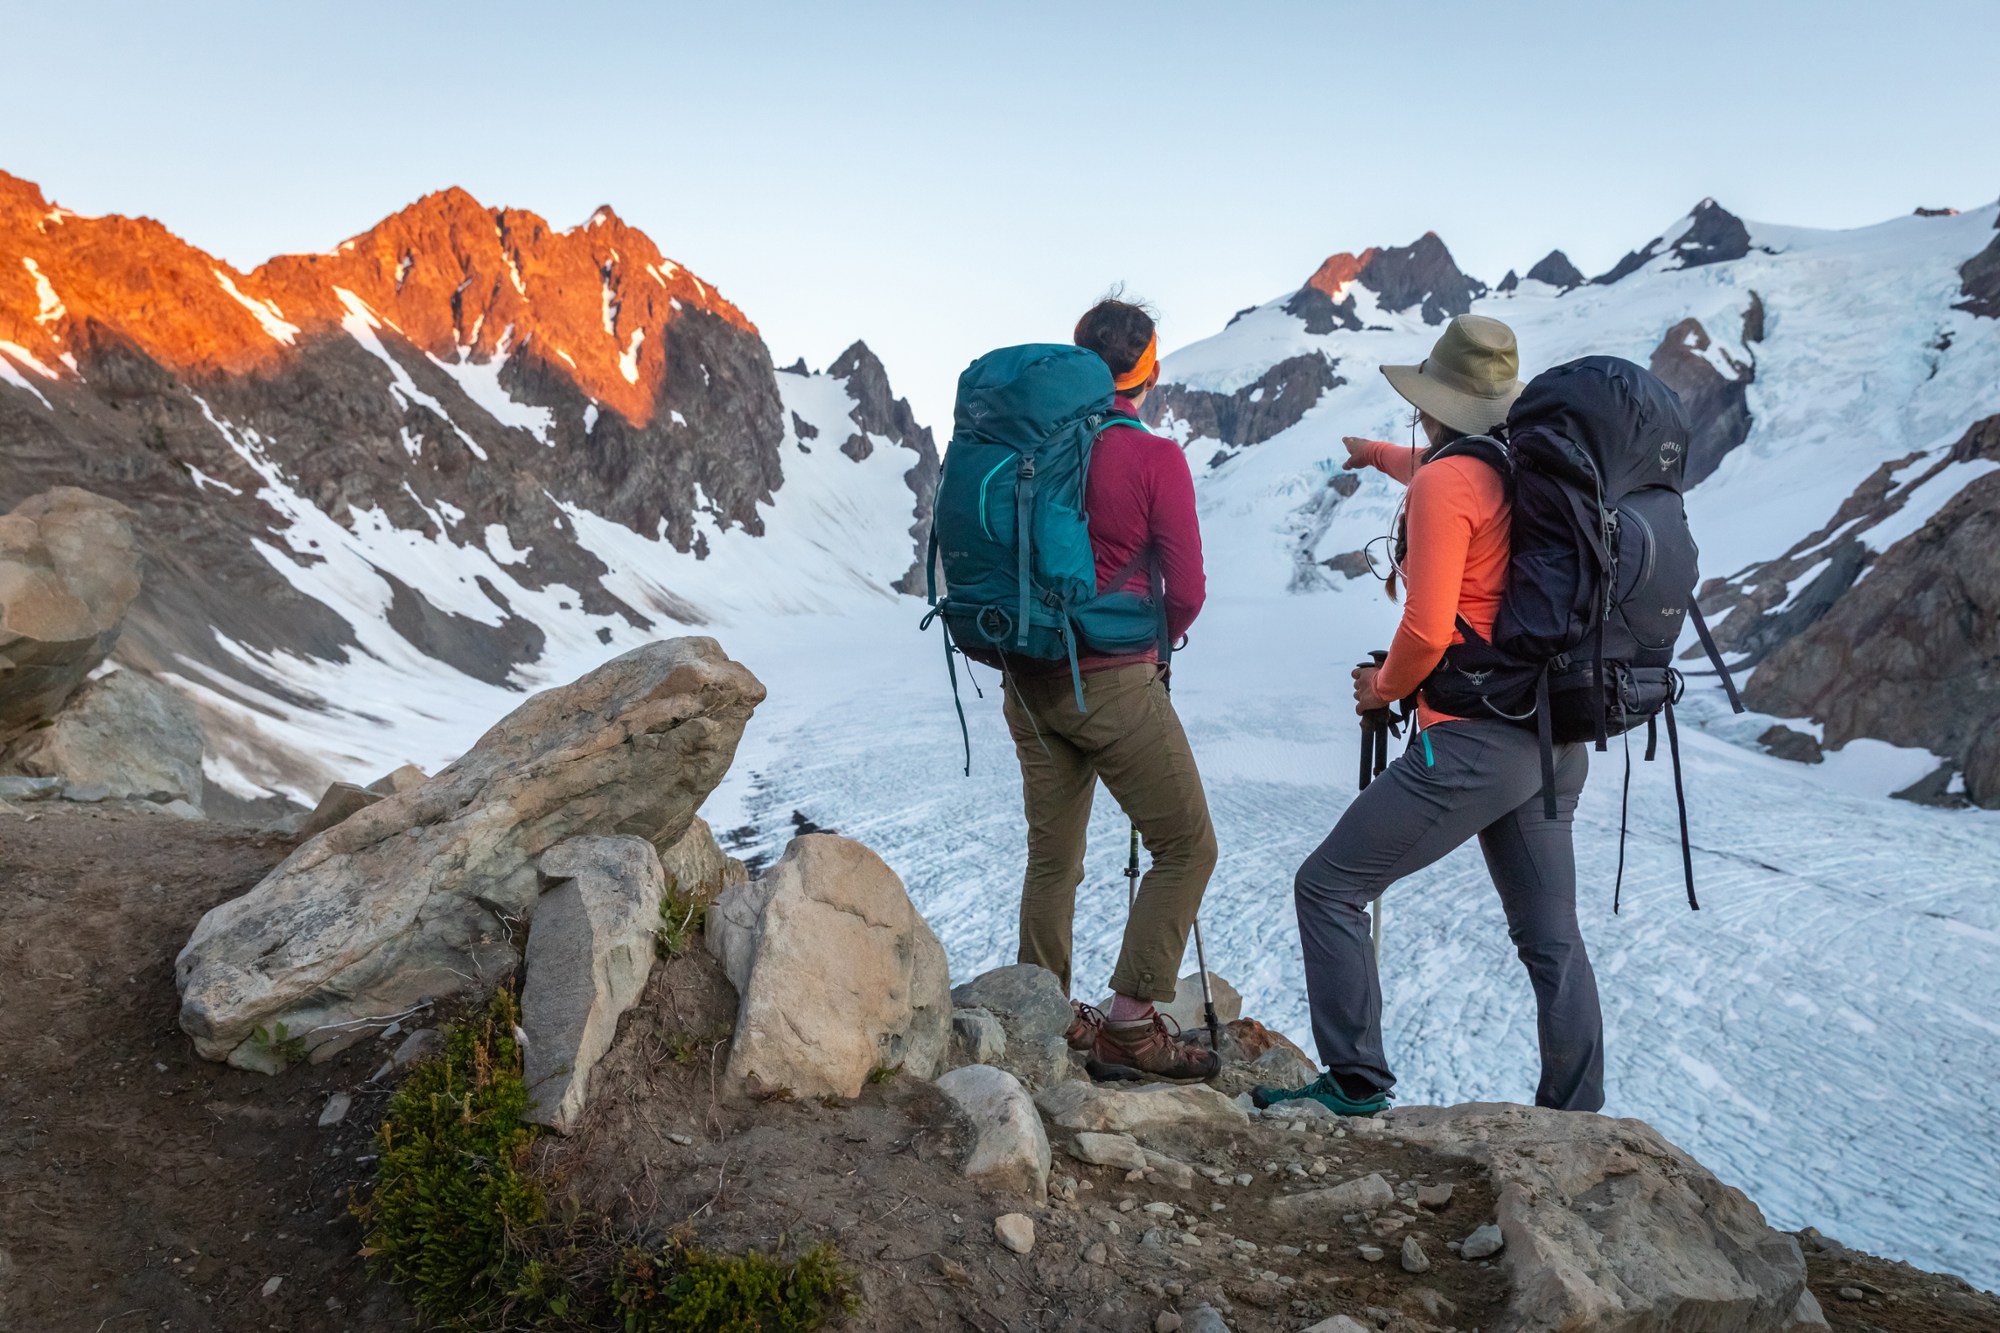 The Bestselling Gear at REI This Week